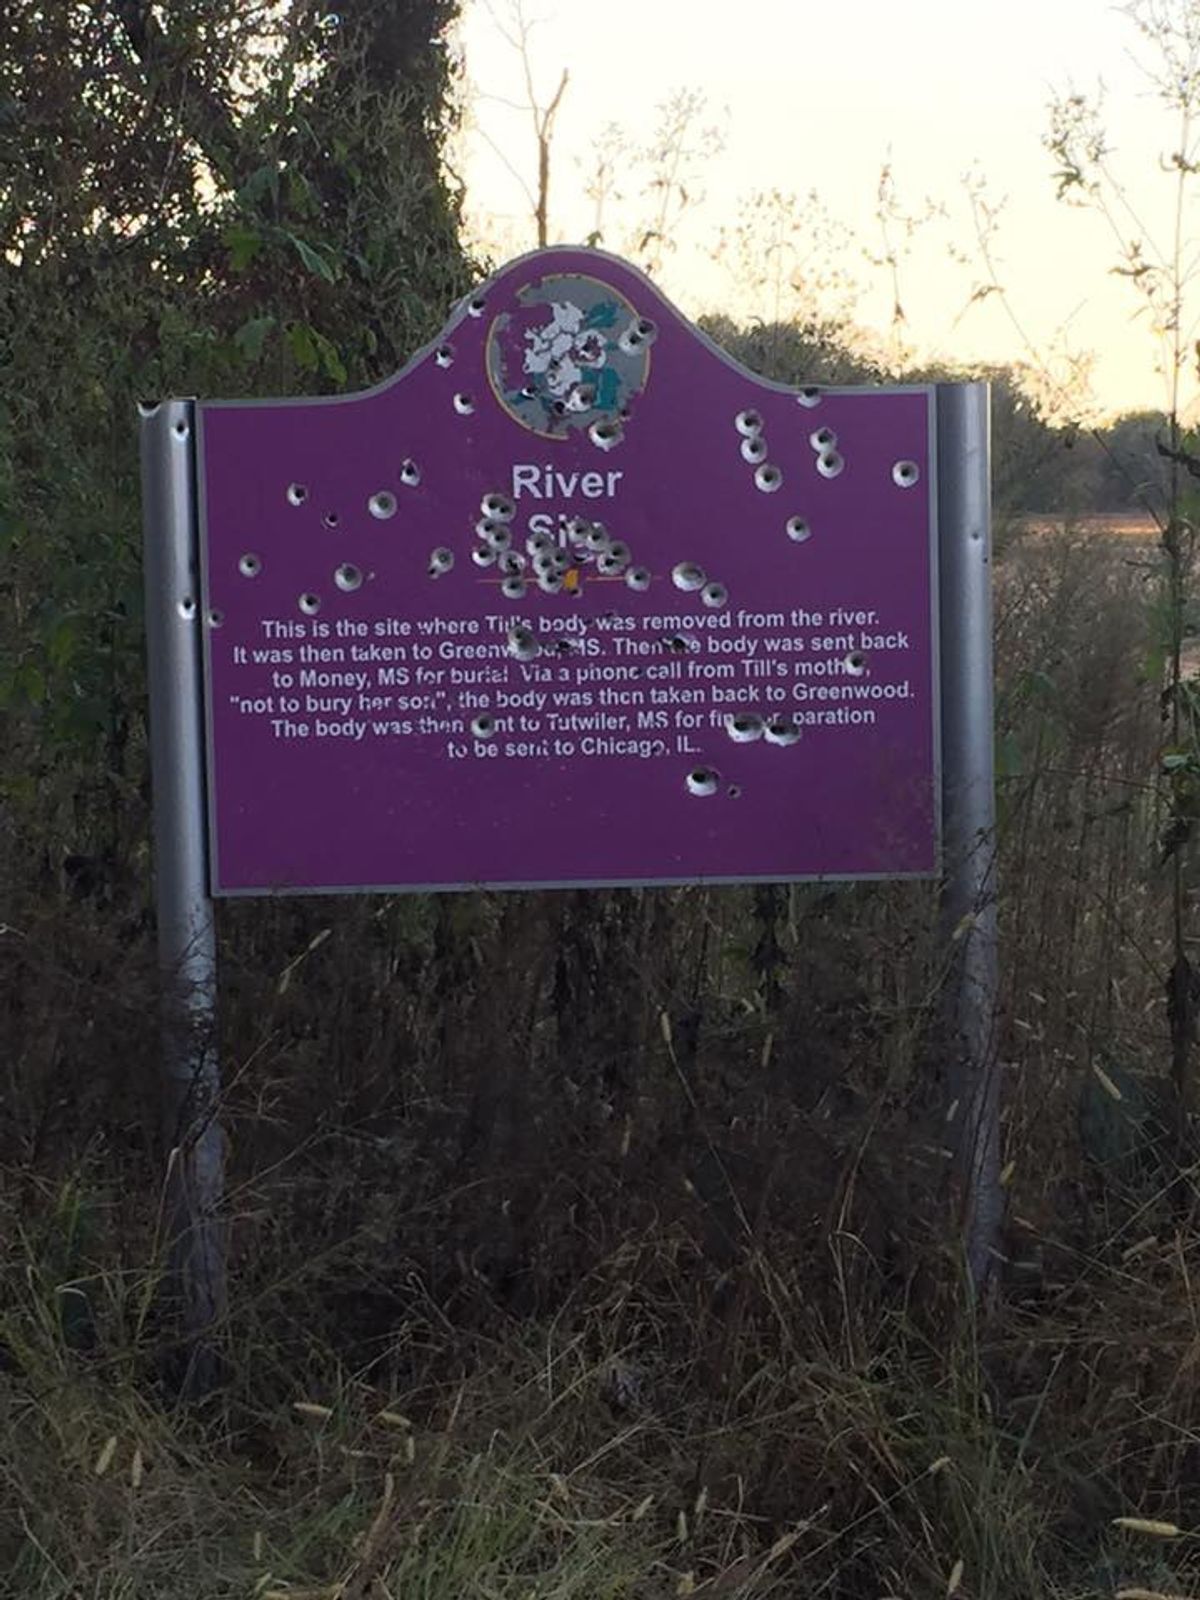 Personal Questions For The People Who Desecrated A Memorial For Emmett Till